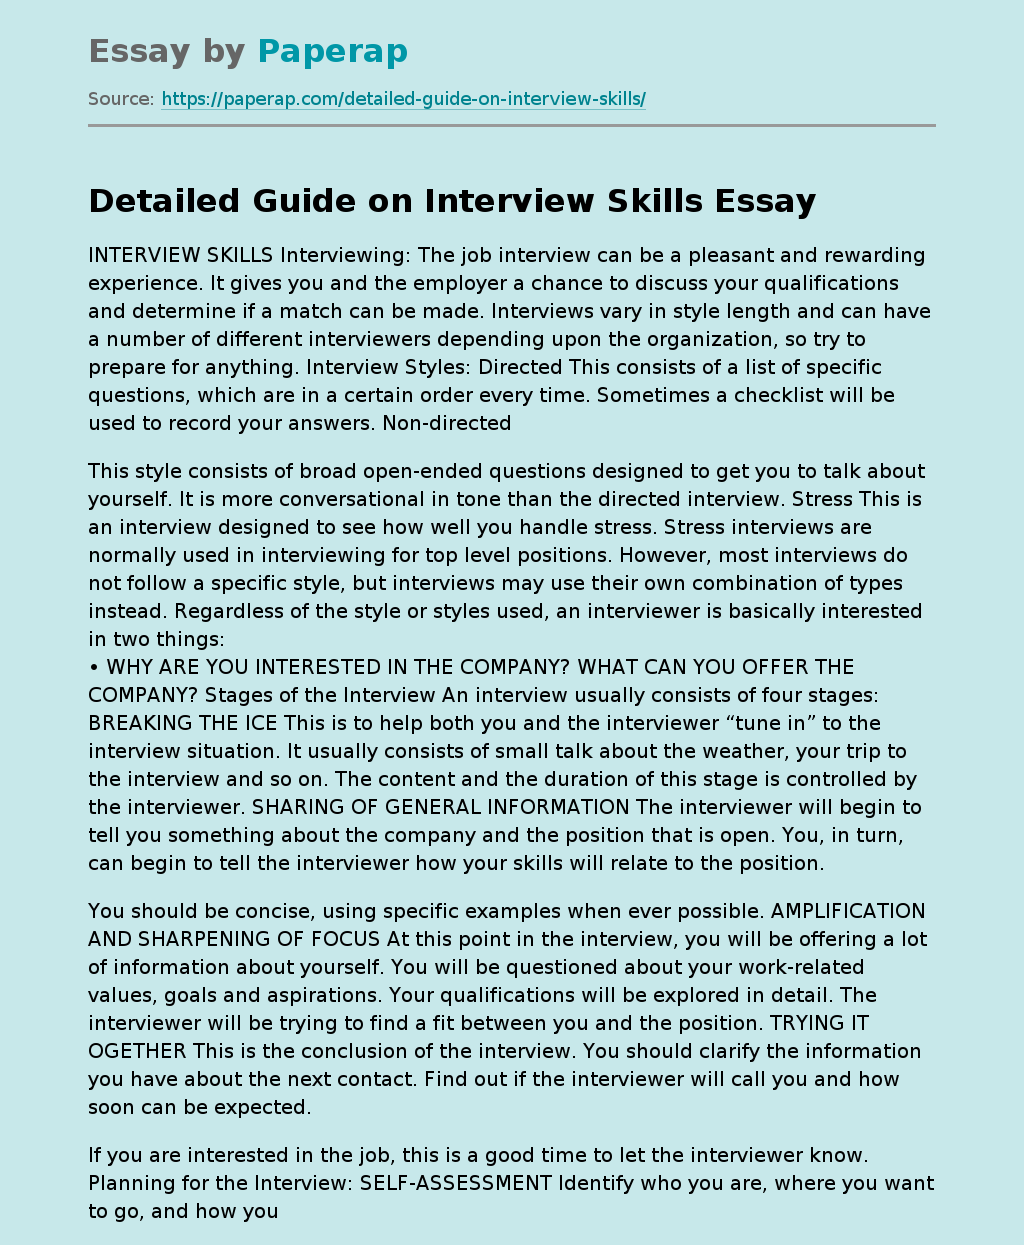 Detailed Guide on Interview Skills